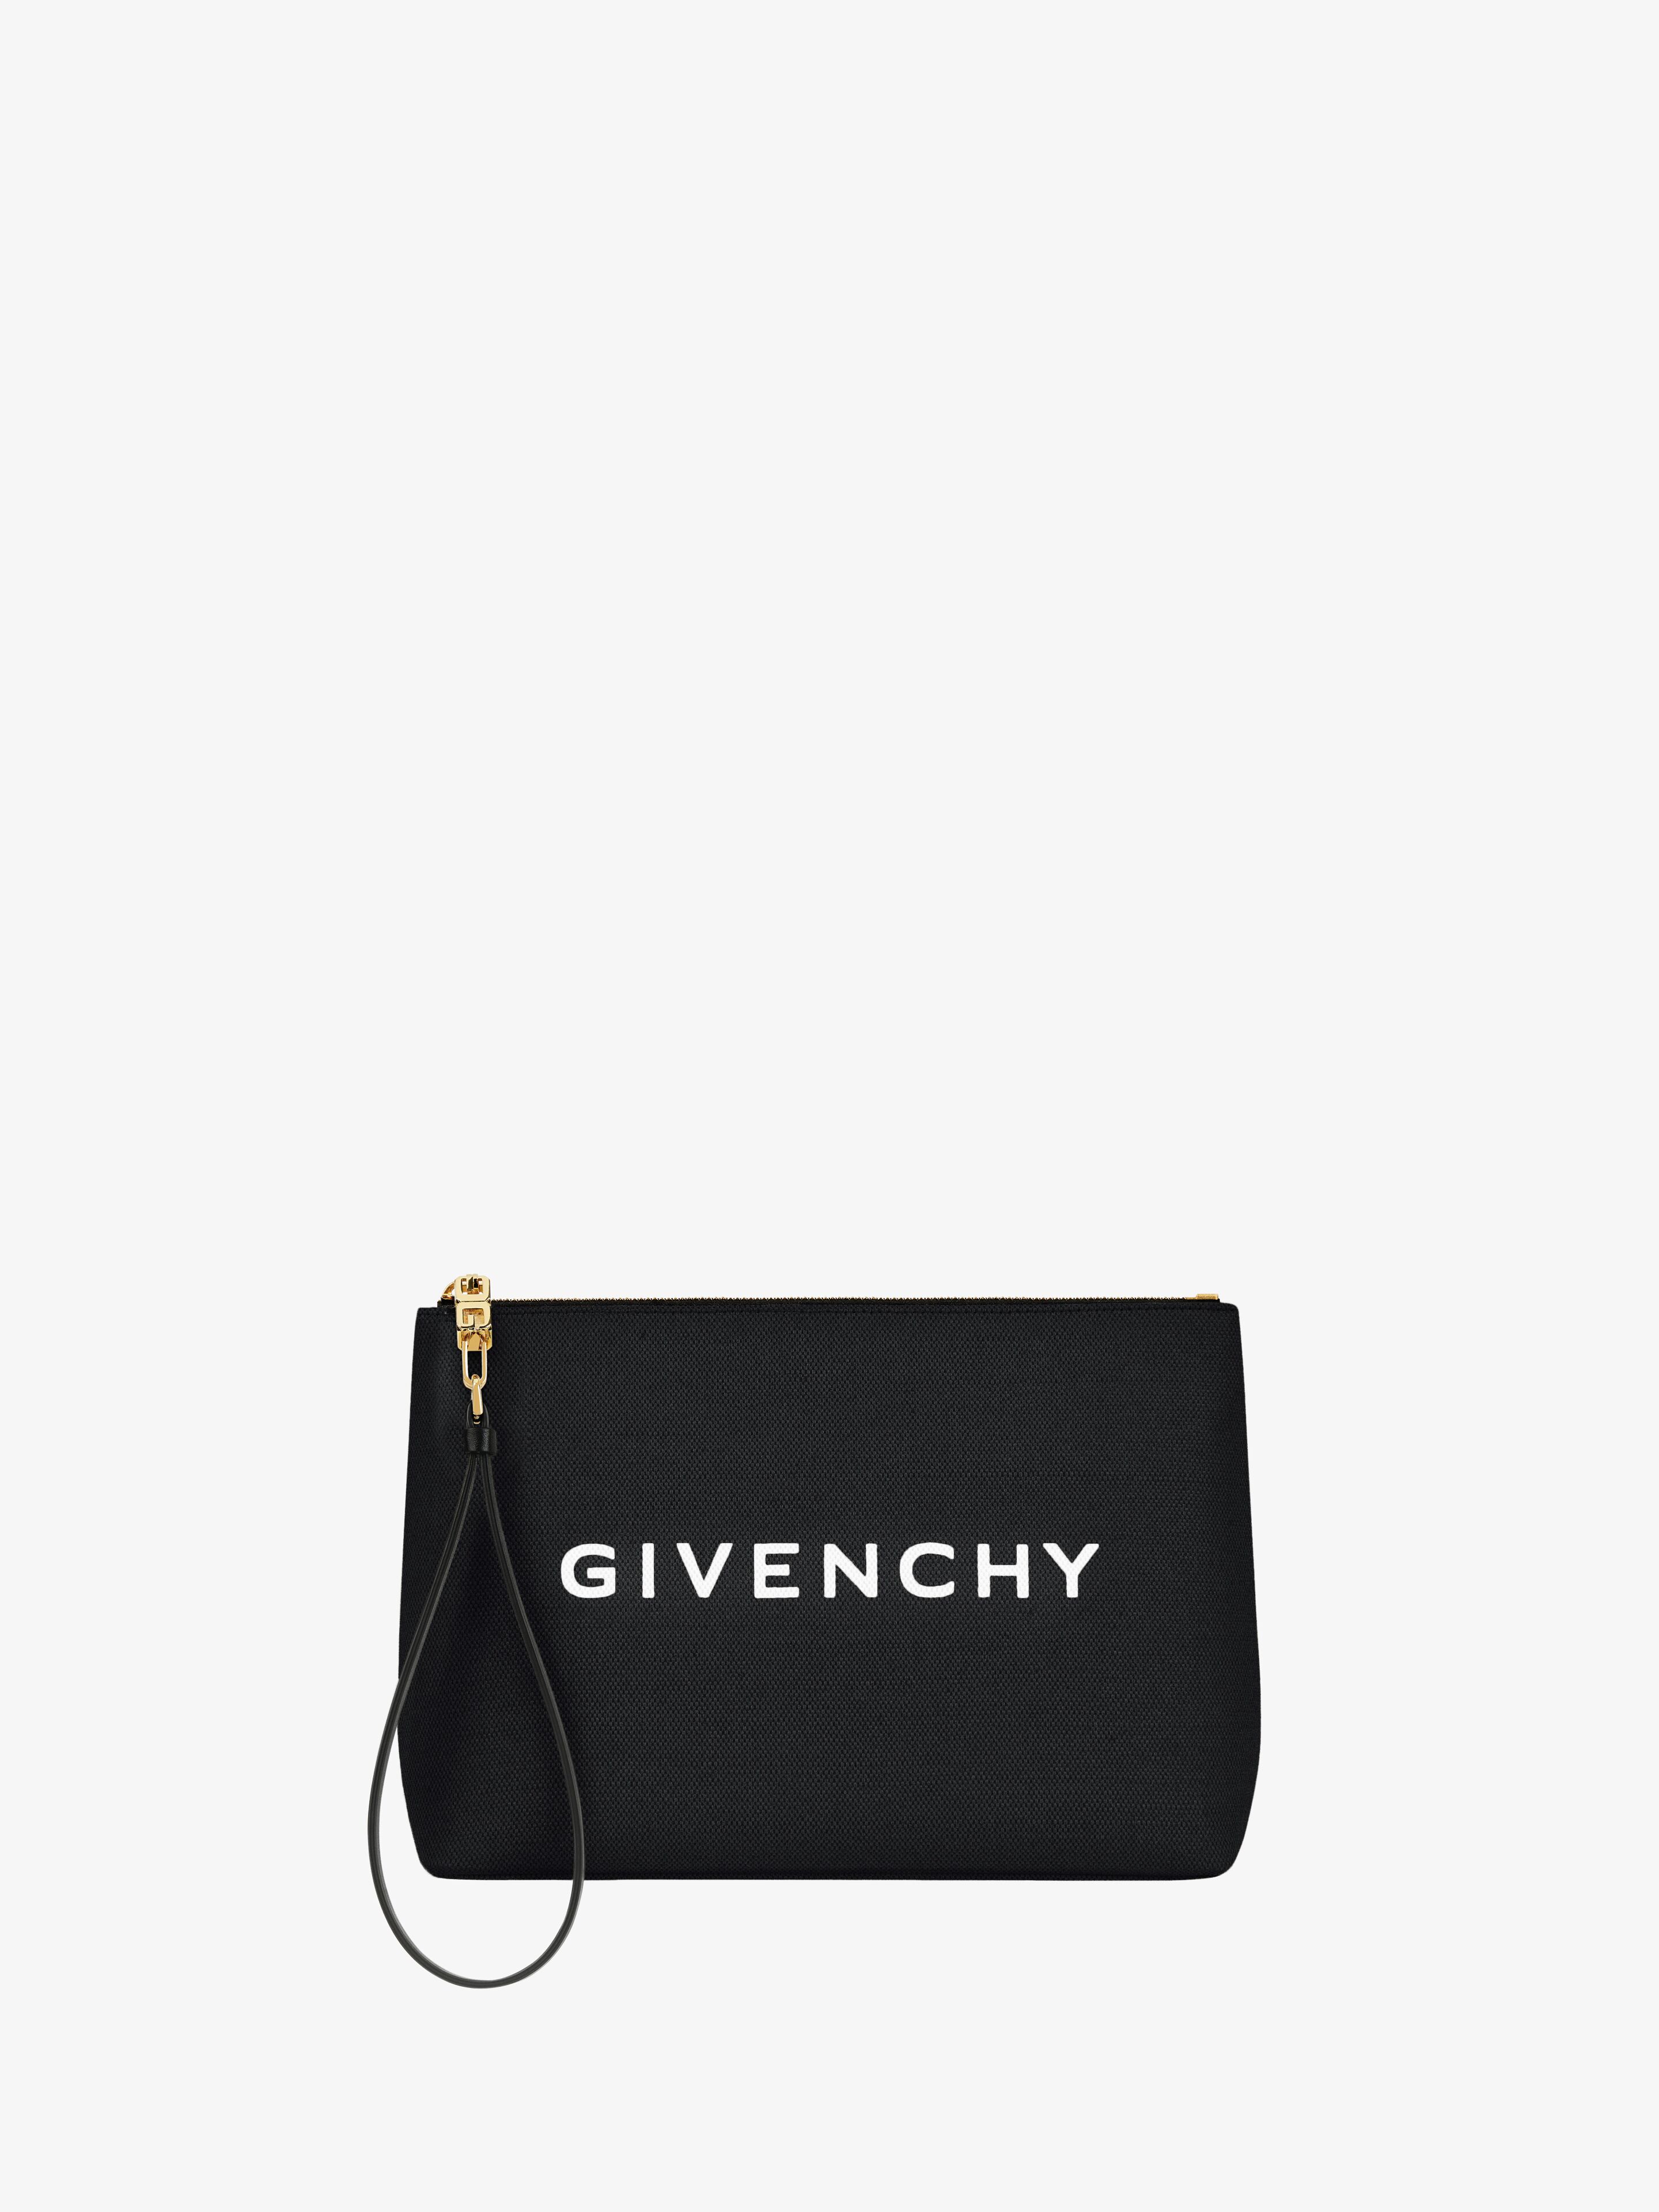 Givenchy Travel Pouch In Canvas In Multicolor